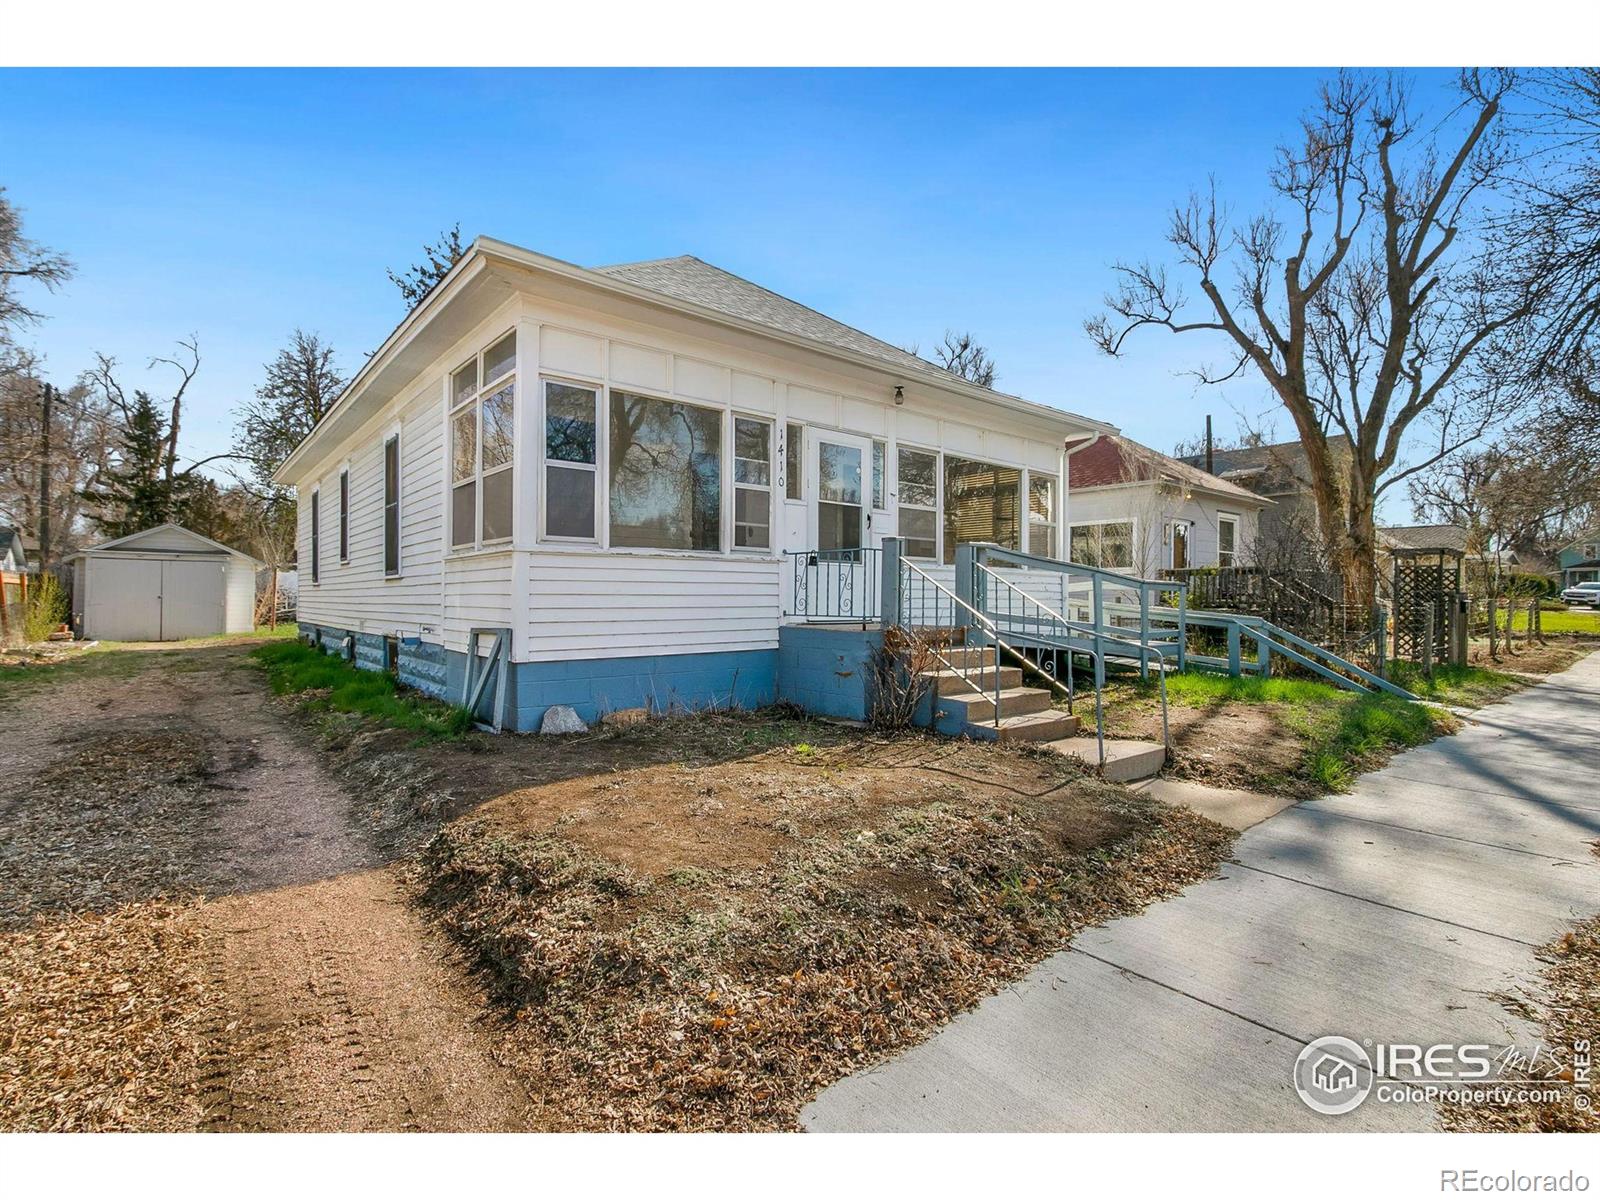 Report Image for 1410  12th Street,Greeley, Colorado